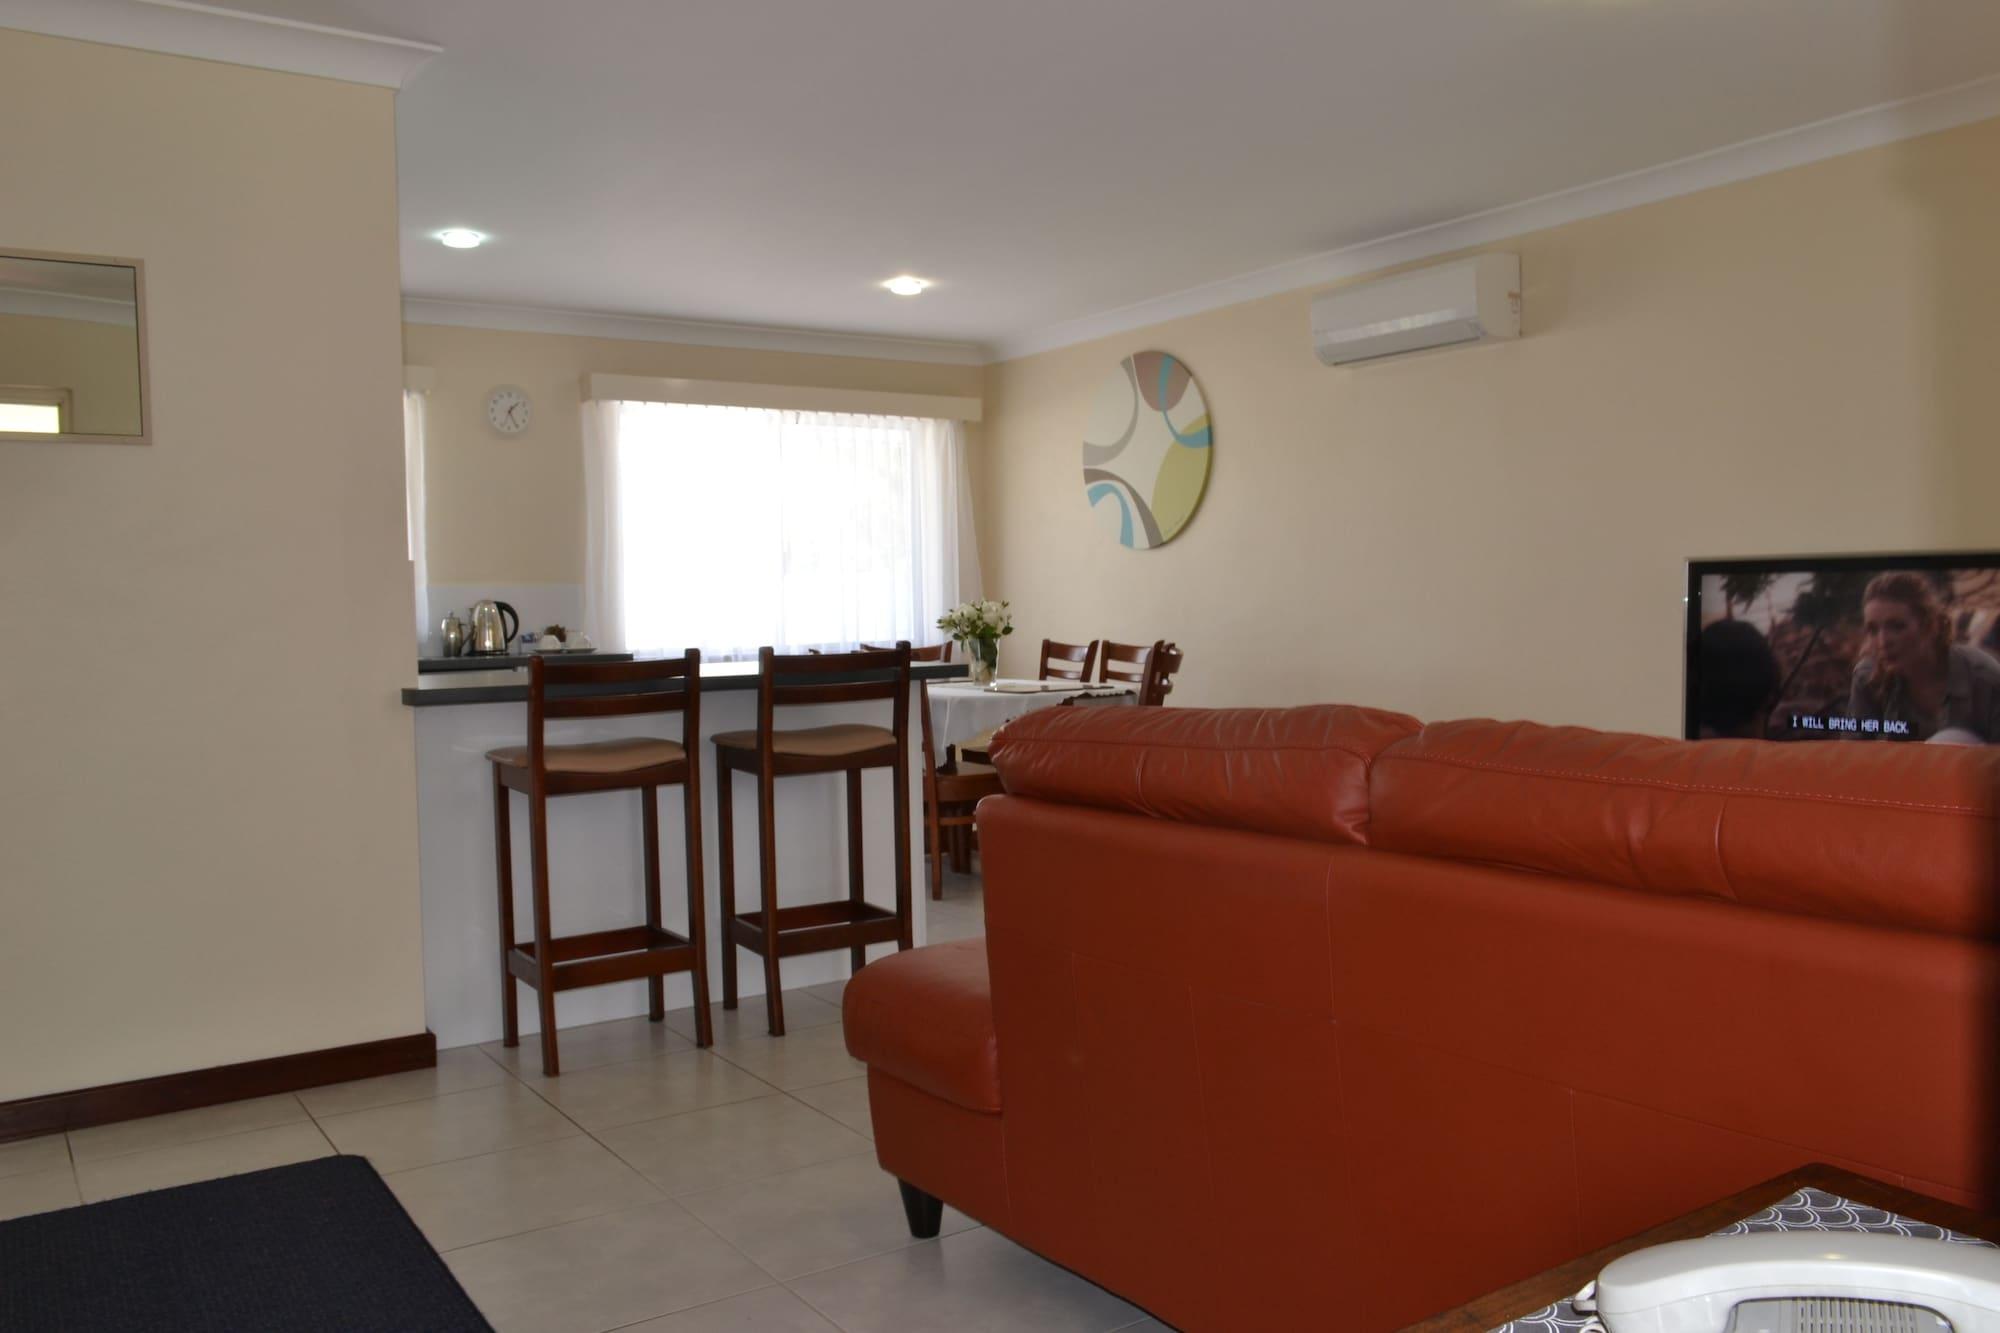 Dolphin Lodge Albany - Self Contained Apartments At Middleton Beach Dış mekan fotoğraf